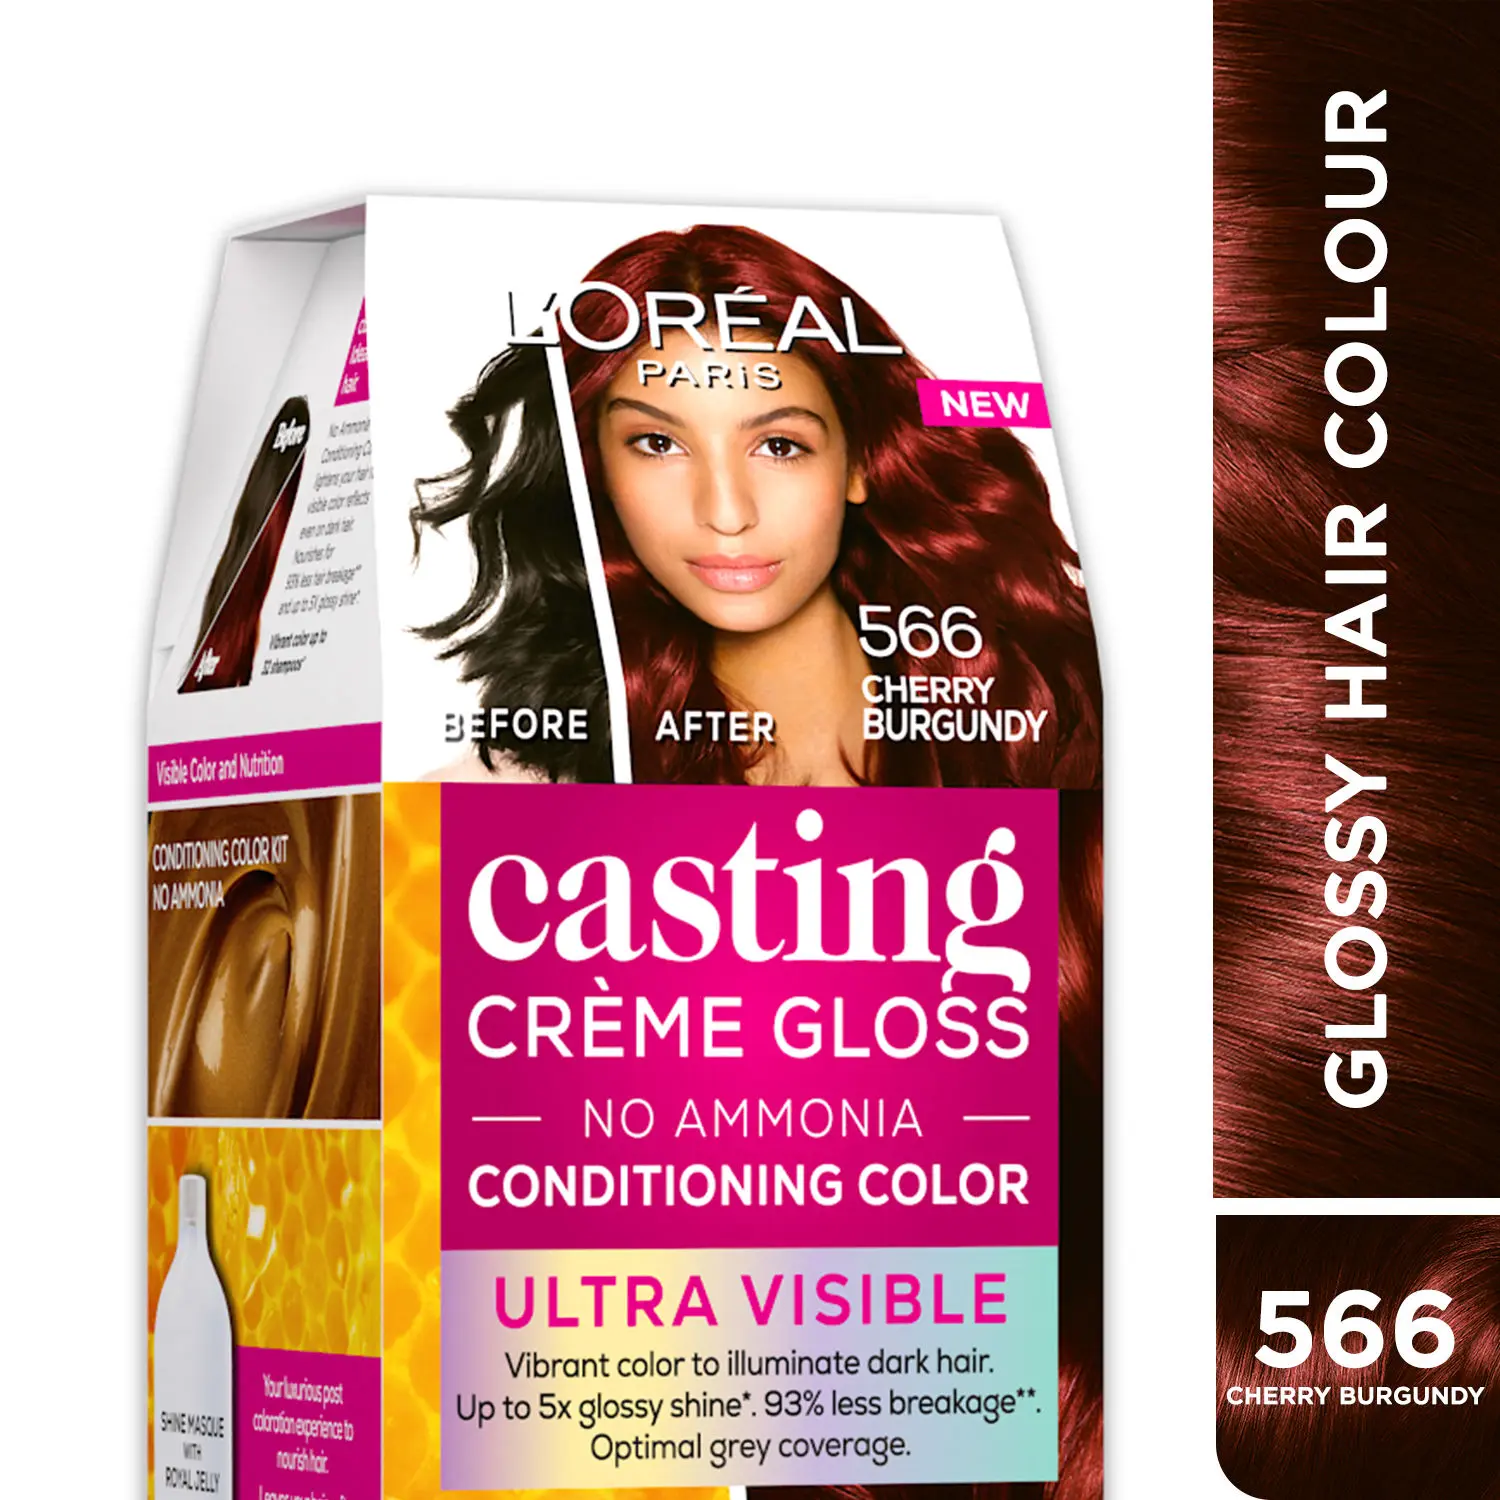 L'Oreal Paris Casting Creme Gloss Ultra Visible Conditioning Hair Color - 566 Cherry Burgundy, 160 g